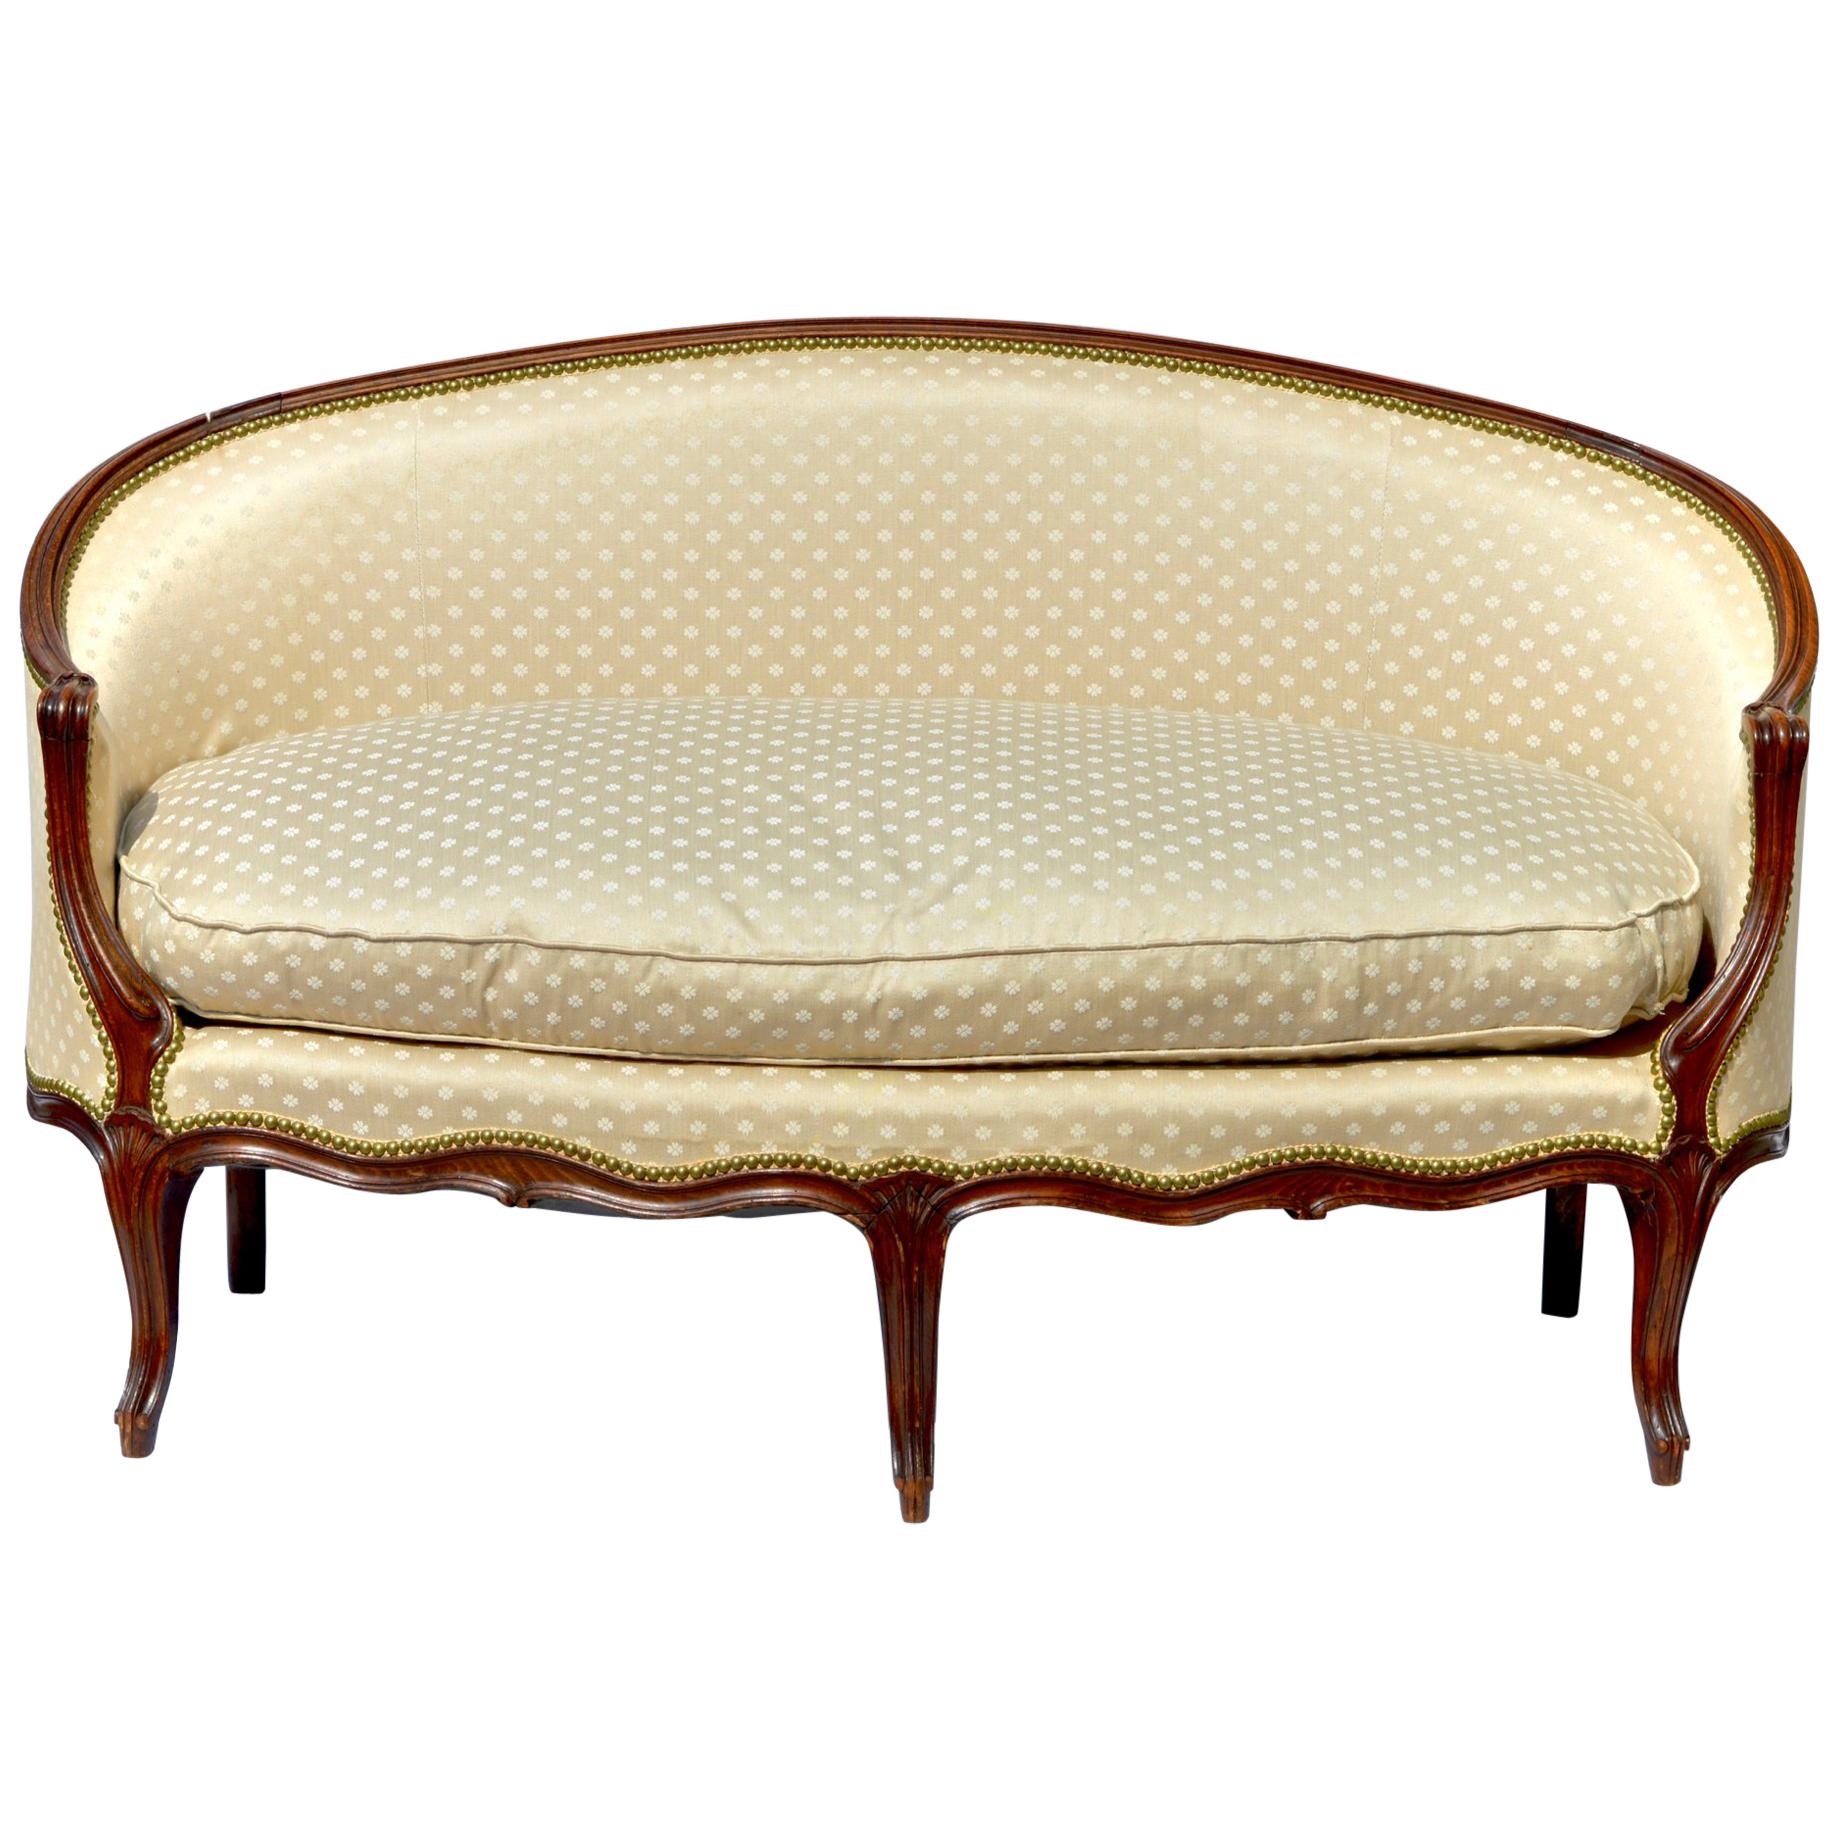 Louis XV Style Settee / Canape of a Curvaceous Form